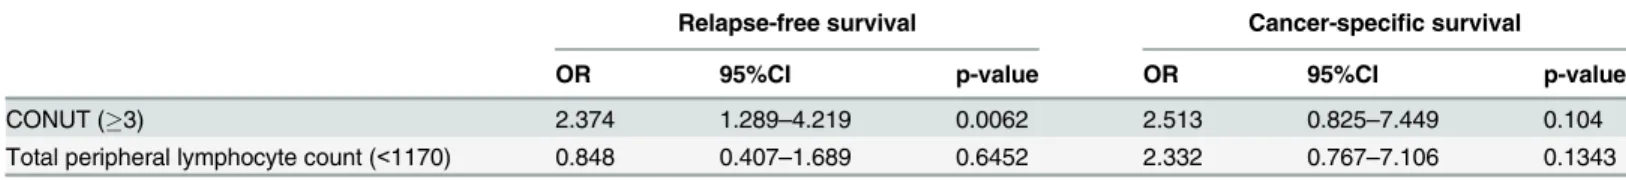 Table 9. The results of the multivariate analysis of the association between the CONUT score and the total peripheral lymphocyte count with relapse-free survival and the cancer-specific survival.